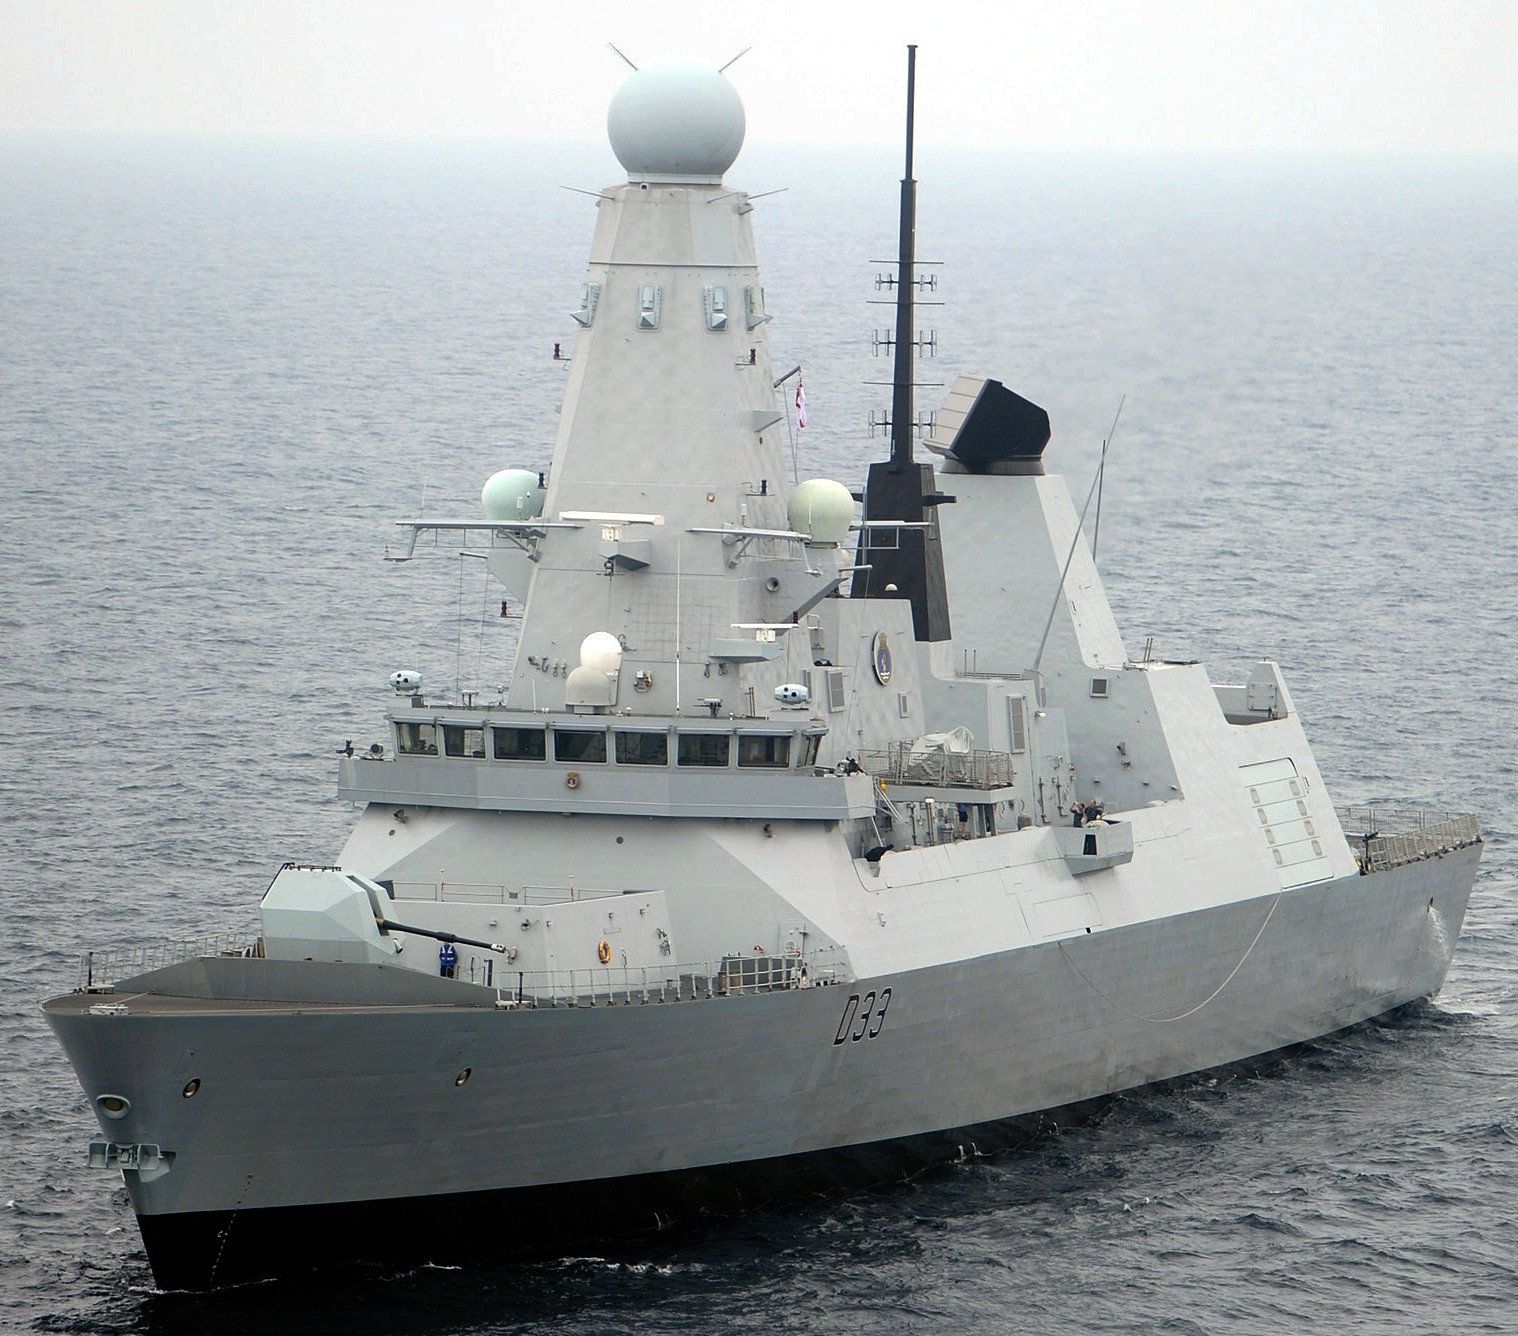 hms dauntless d-33 type 45 daring class guided missile destroyer royal navy sea viper paams 23